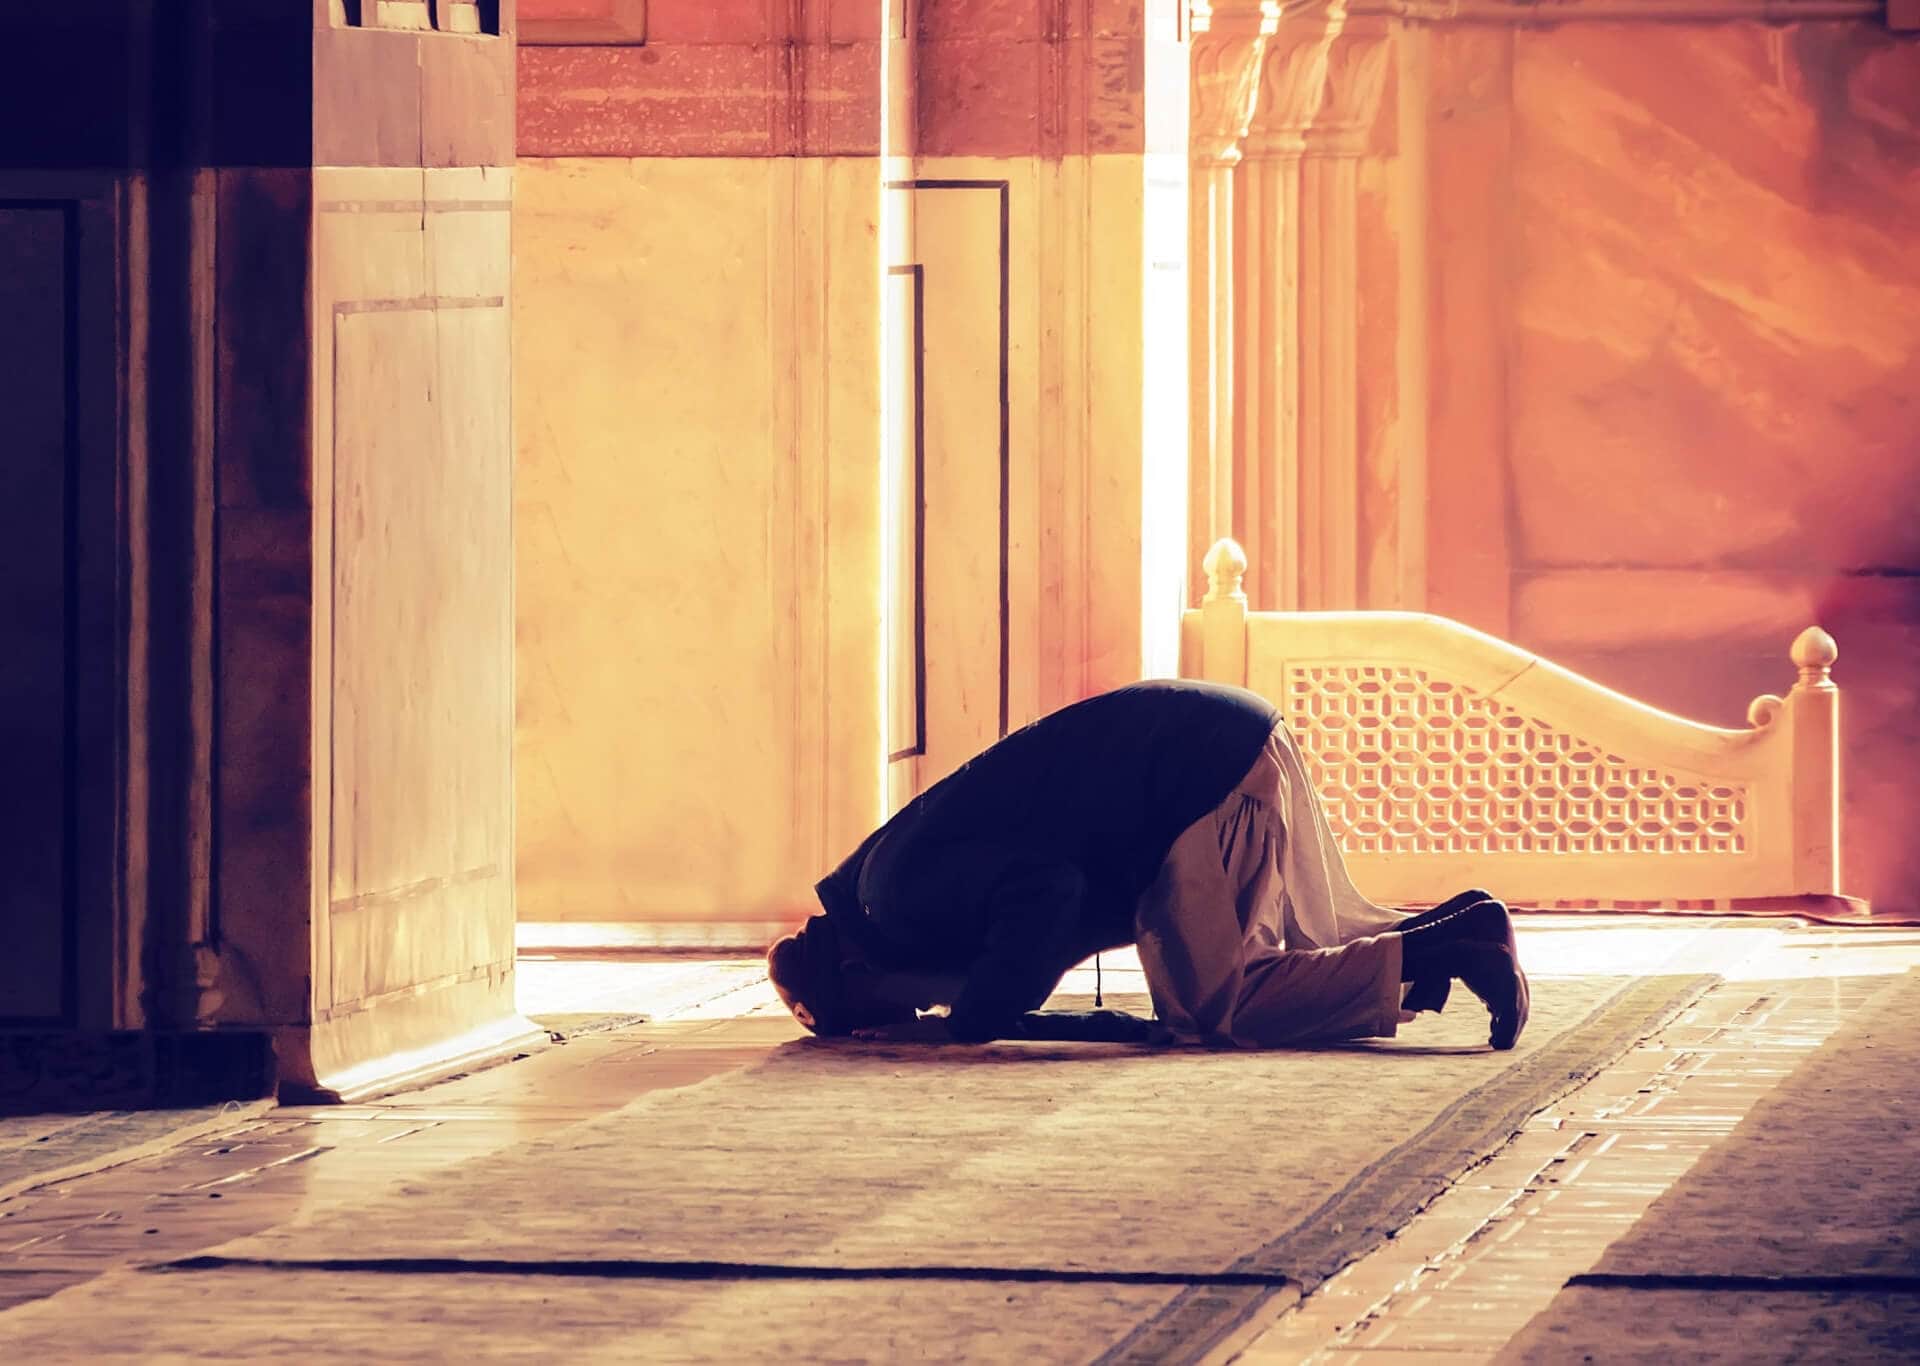 The muslim prayer for god in the mosque